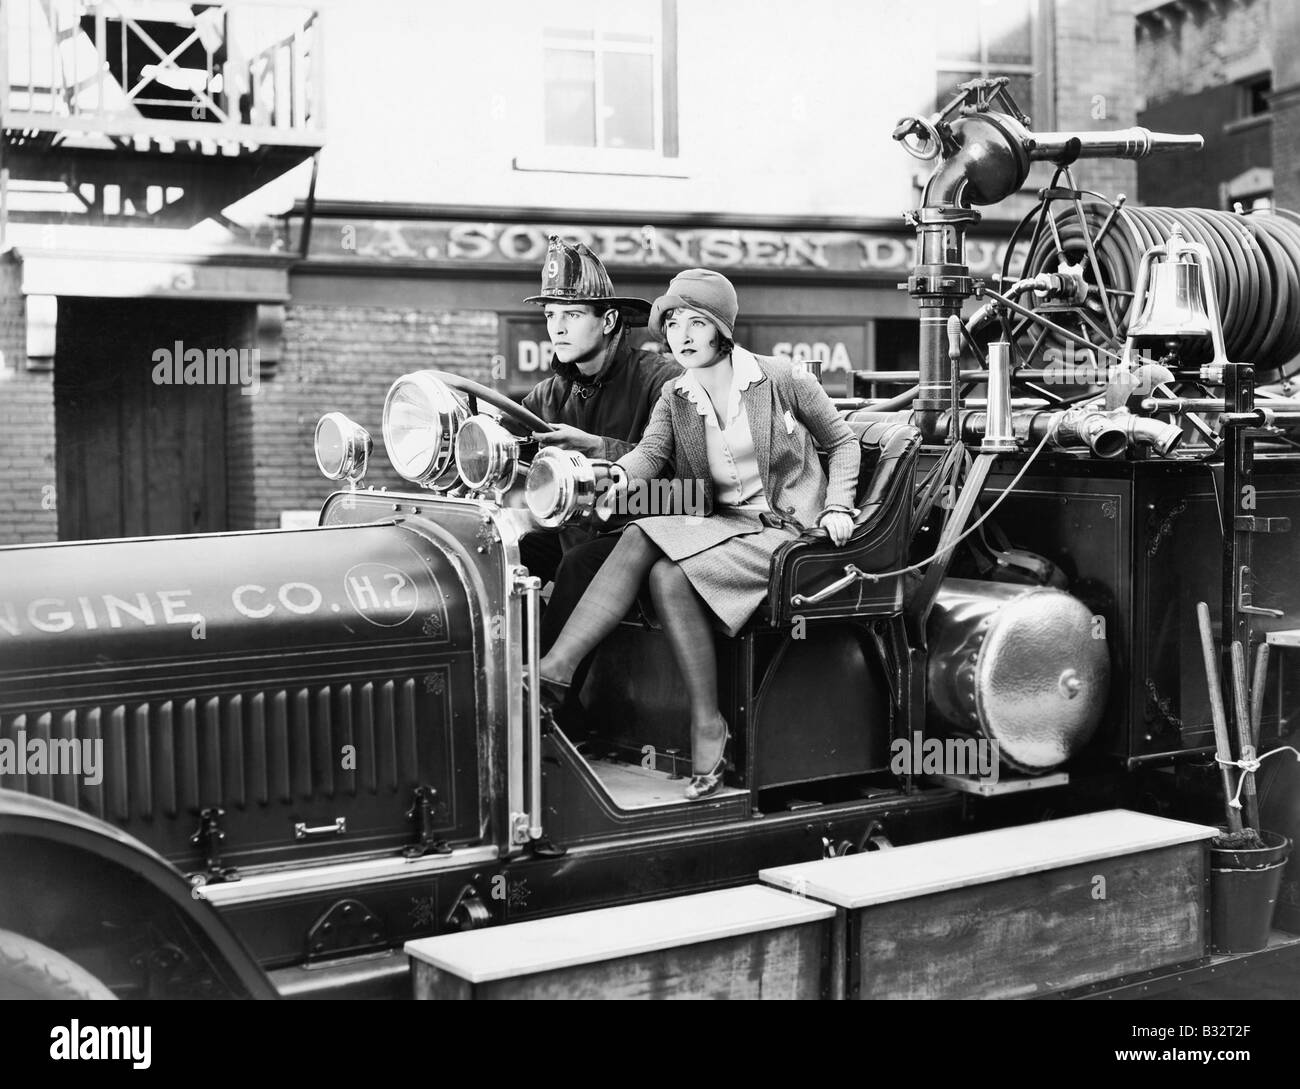 Firefighter driving a fire engine and a young woman sitting beside him Stock Photo